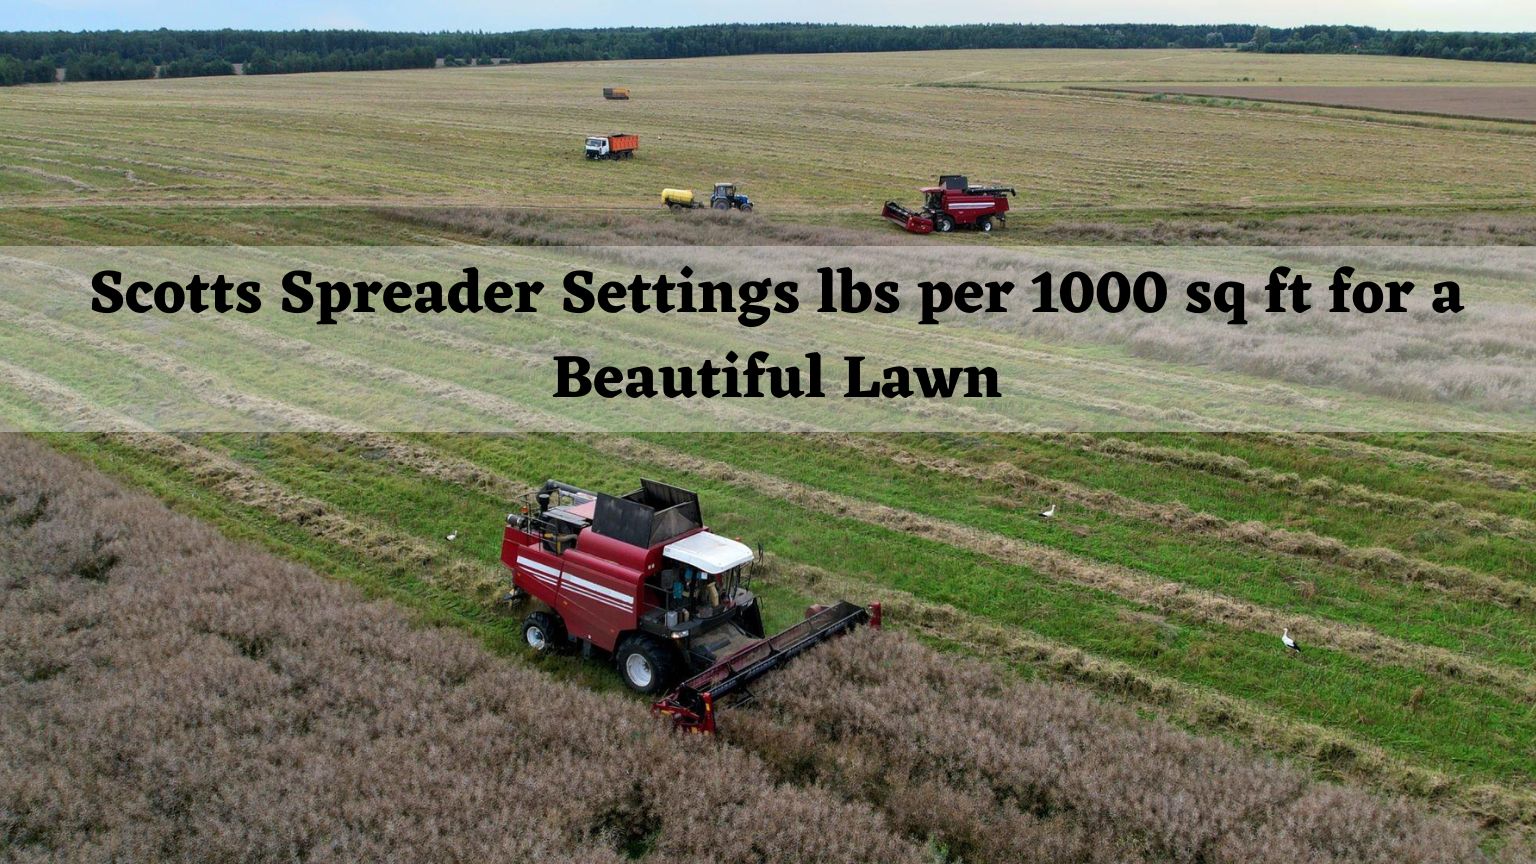 scotts-spreader-settings-lbs-per-1000-sq-ft-for-best-lawn